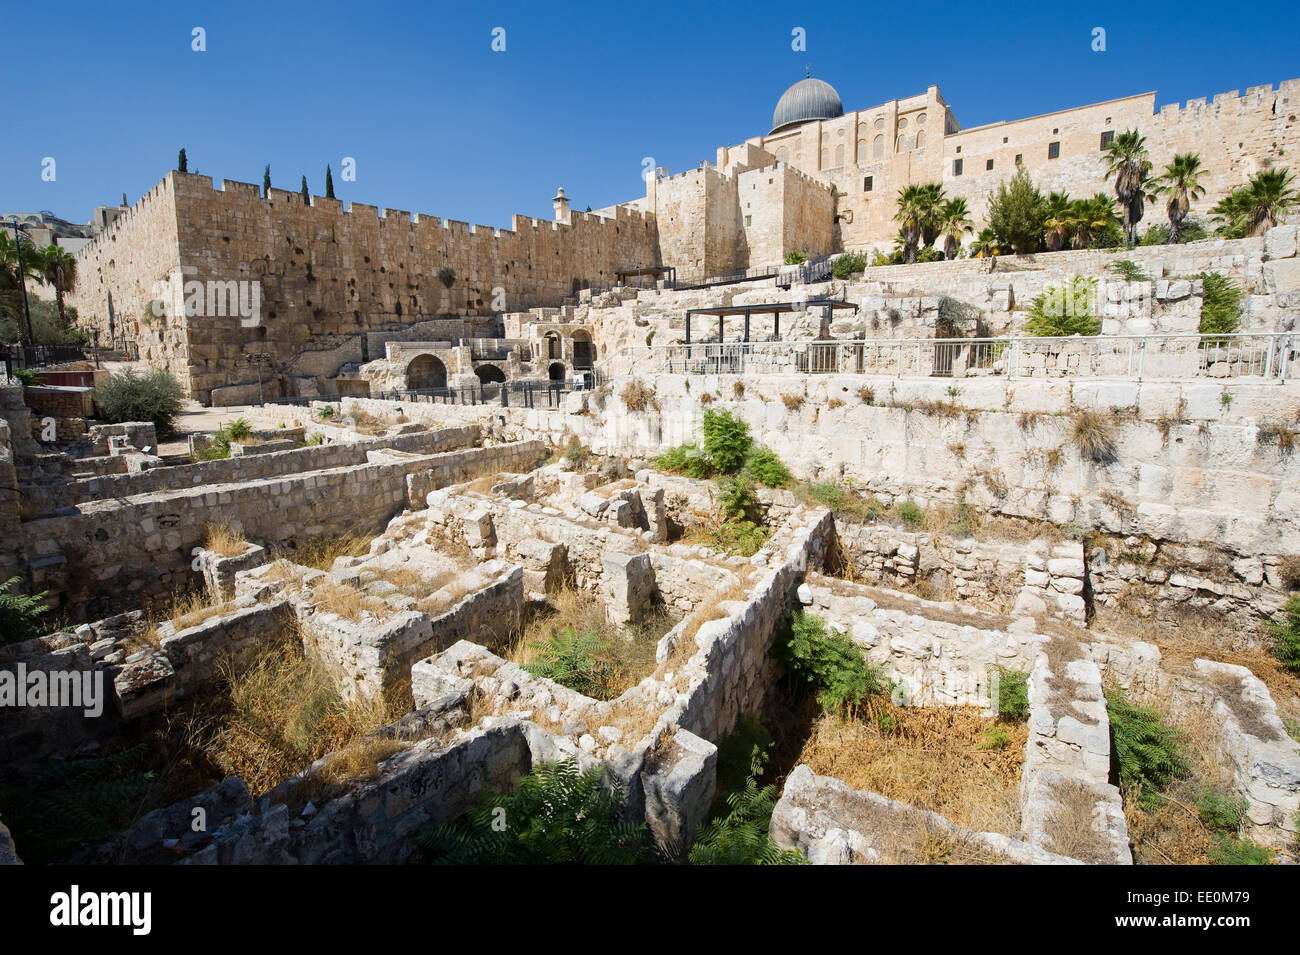 Ruins and remains in 'the ophel archaeological garden' just south of the temple mount in Jerusalem, in the city of David. Stock Photo